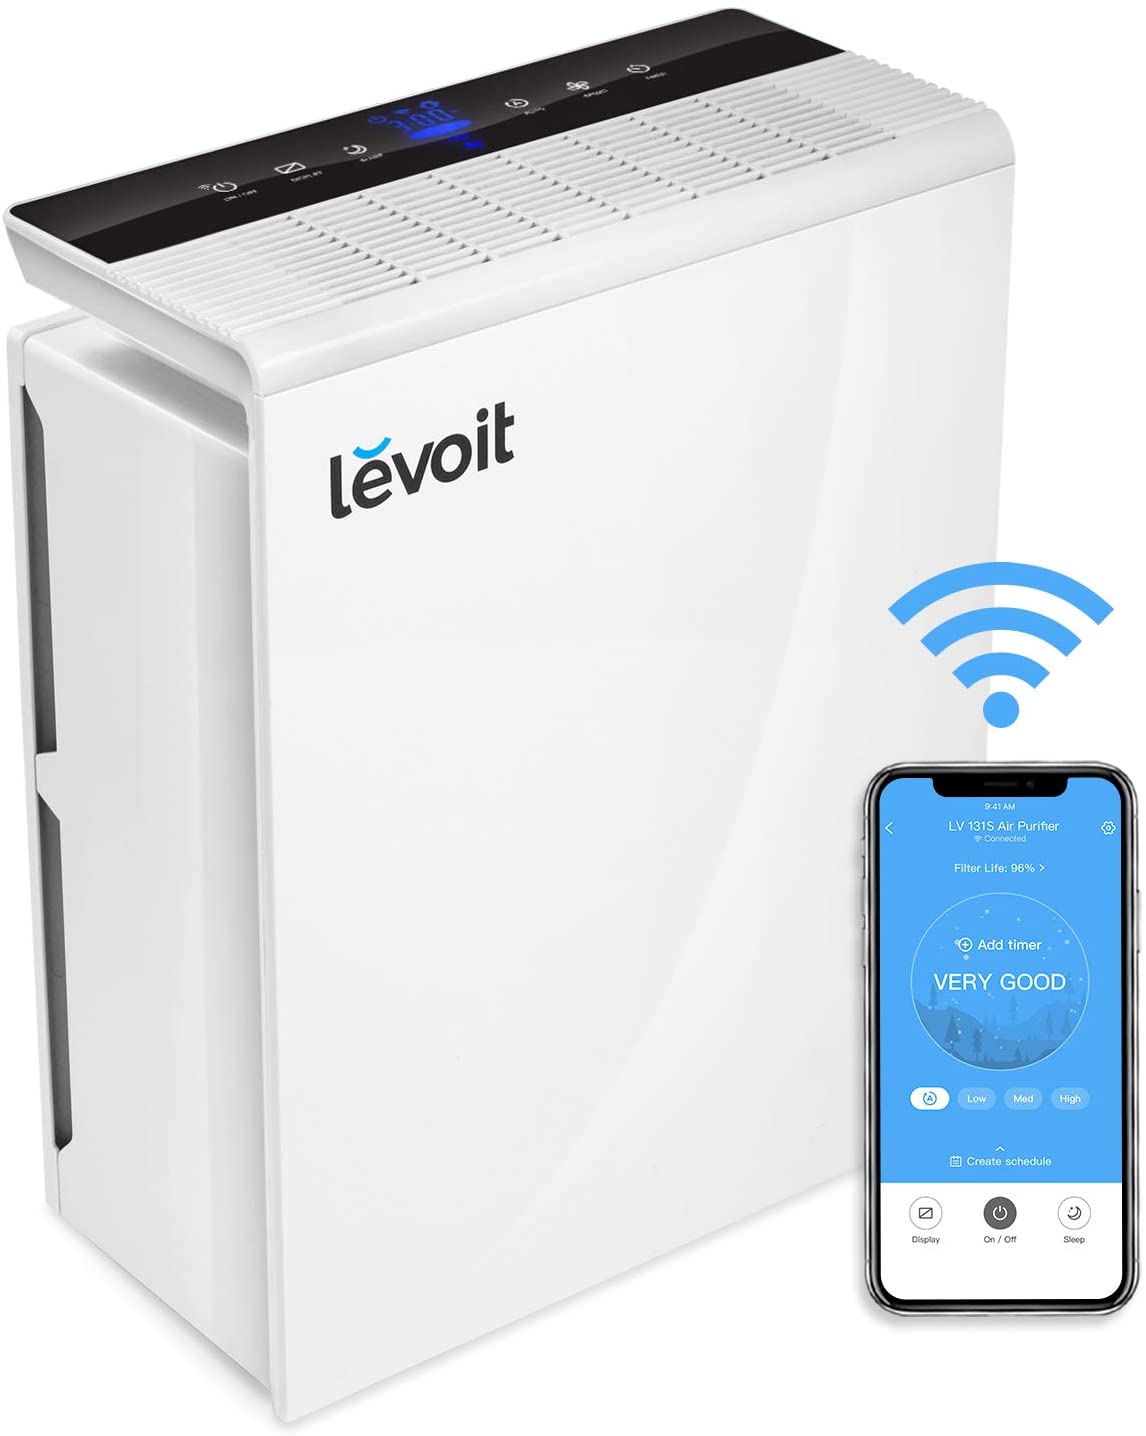 LEVOIT Smart Wi-Fi Air Purifier for Home Best Baby Air Purifier